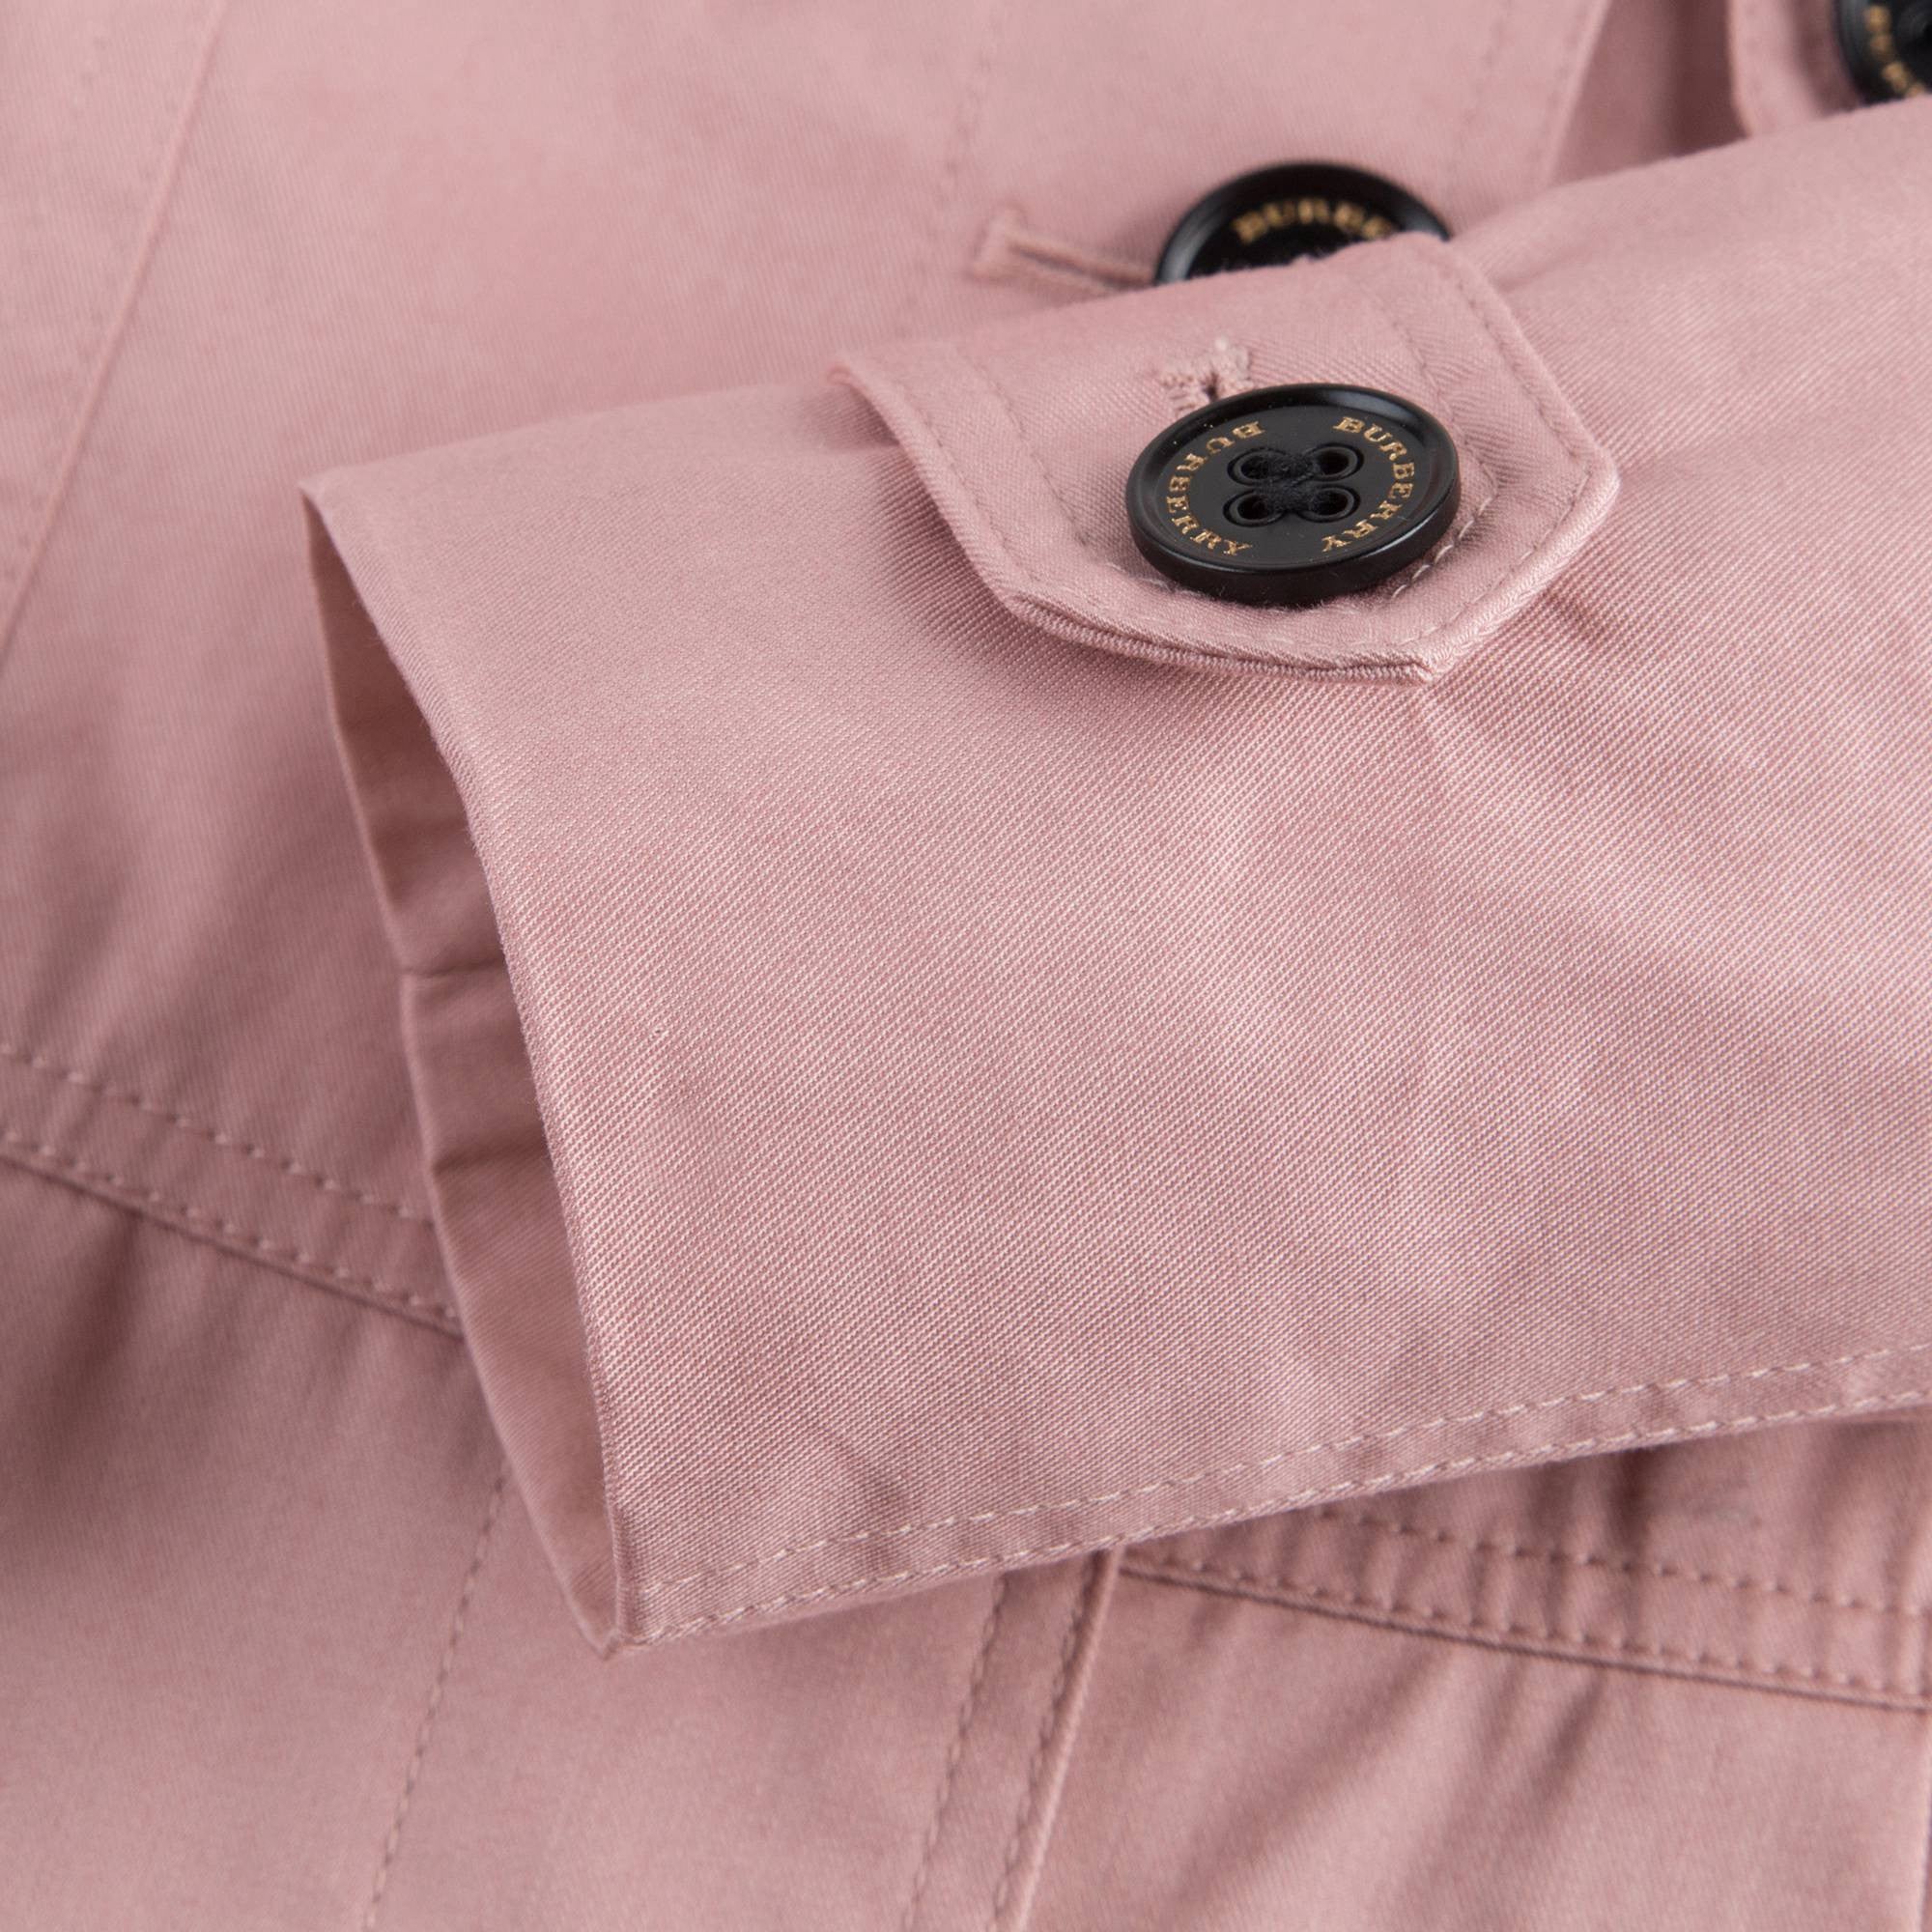 Baby Girls Pale Pink Trench Coat